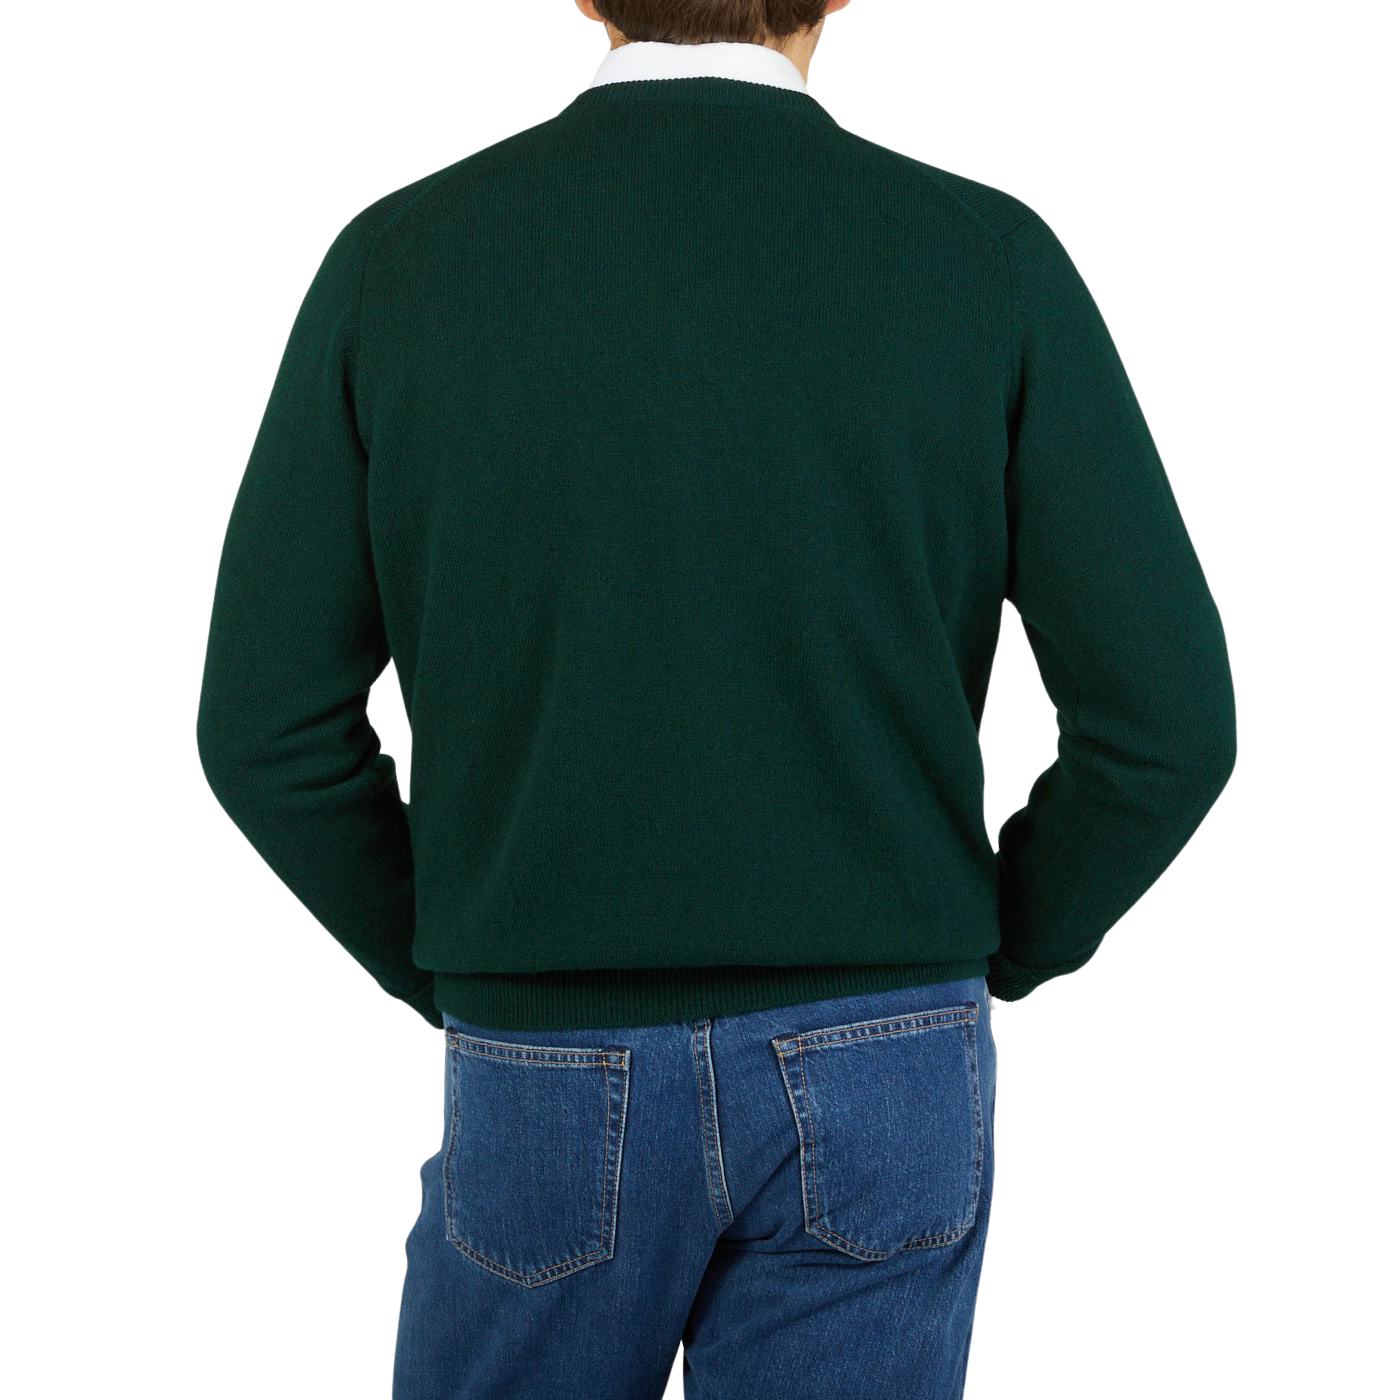 The back view of a man wearing a William Lockie Tartan Green Lambswool V-Neck Sweater and jeans.